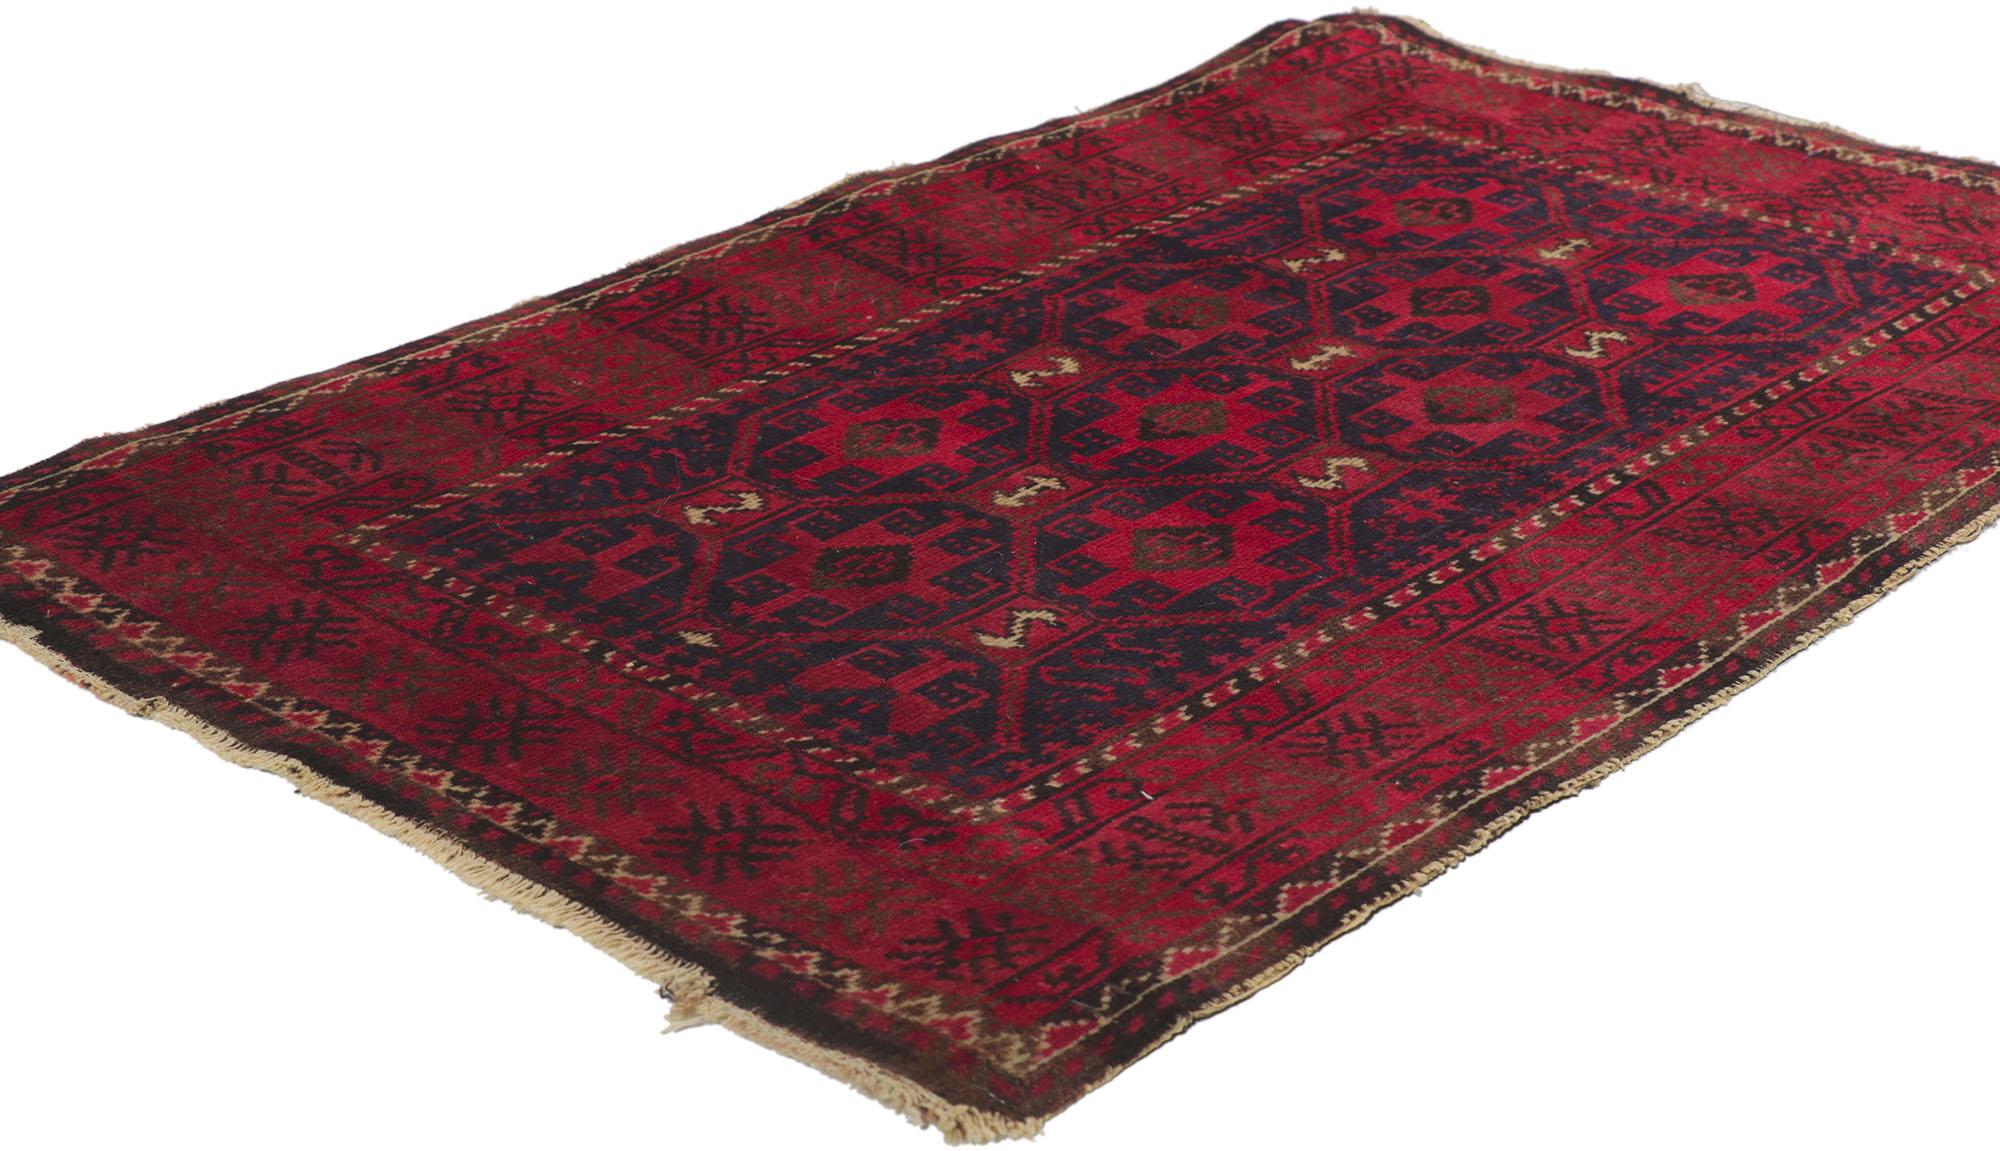 78215 Vintage Persian Turkoman rug, 02'01 x 03'05. Abrash. Desirable Age Wear. Hand-knotted wool. Made in Iran.